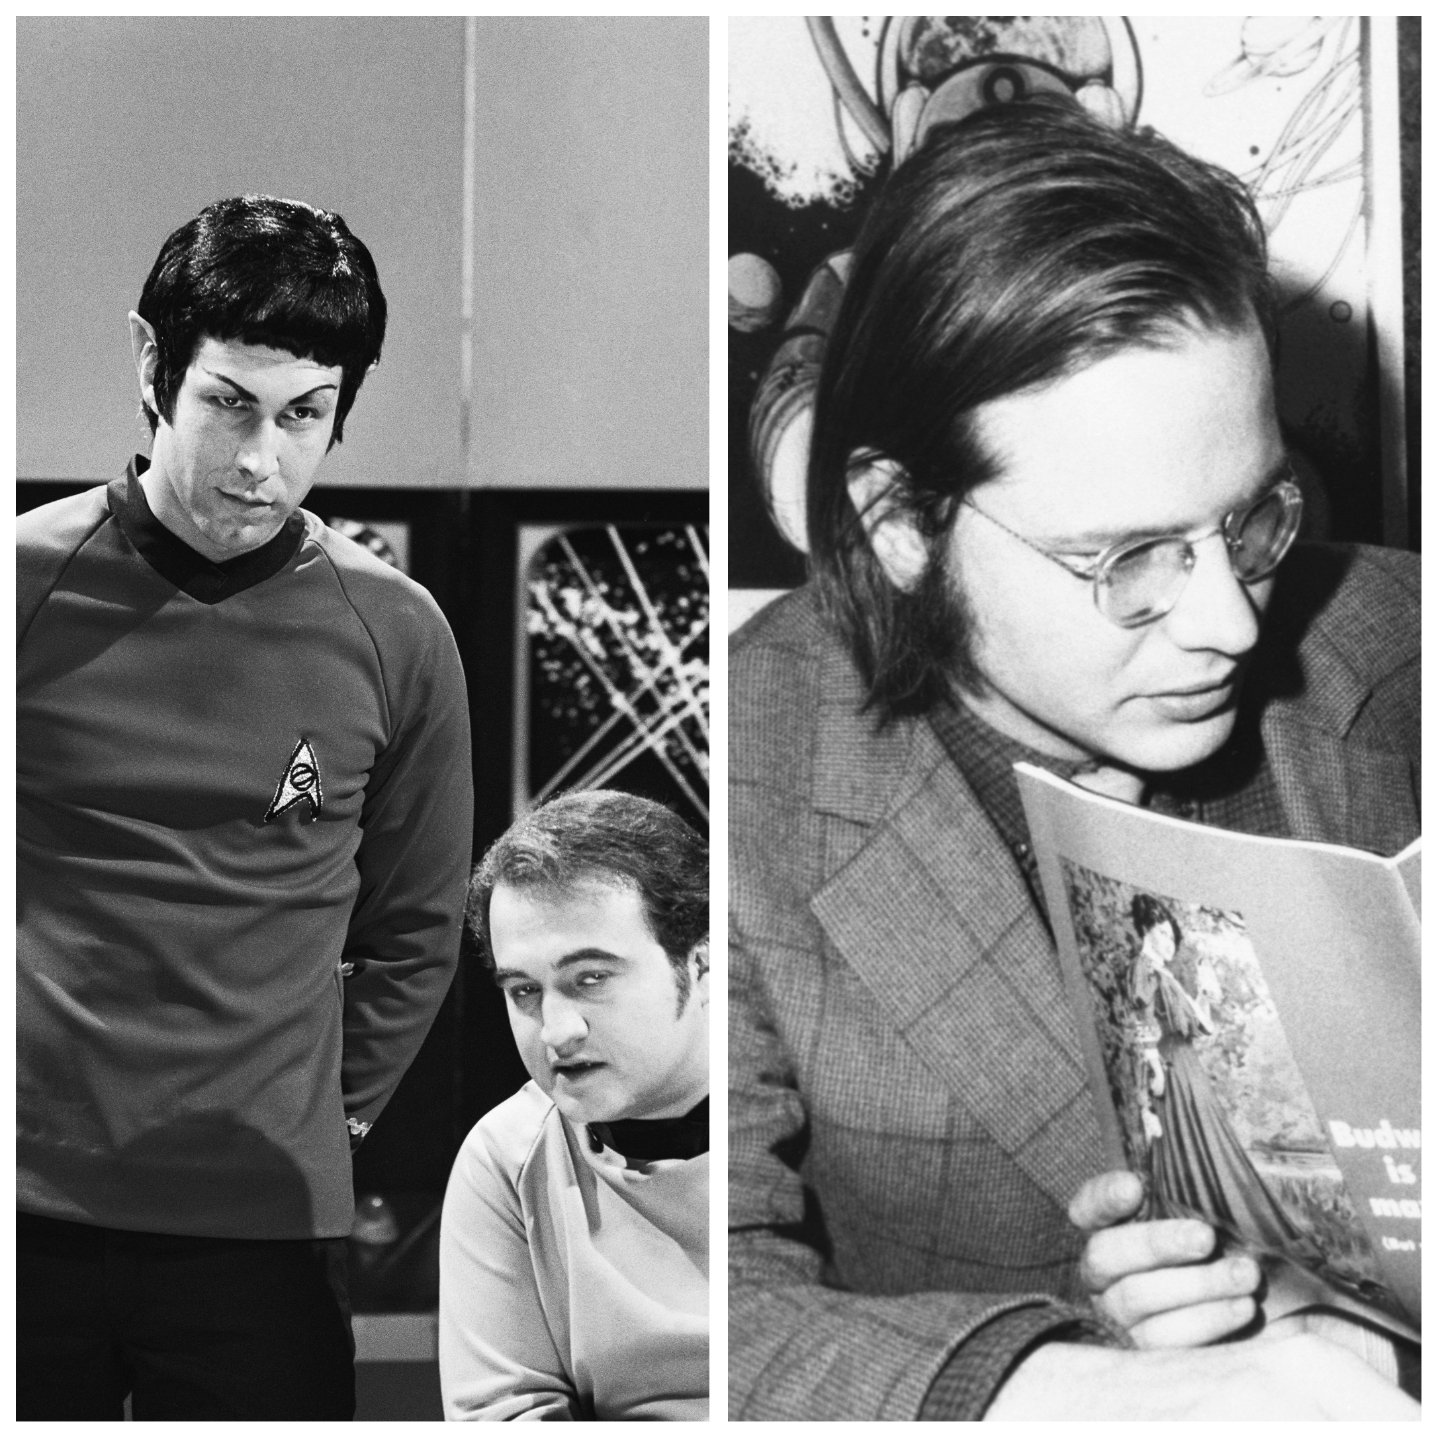 Chevy Chase and John Belushi in a Star Trek sketch. Doug Kenney looks at a magazine.